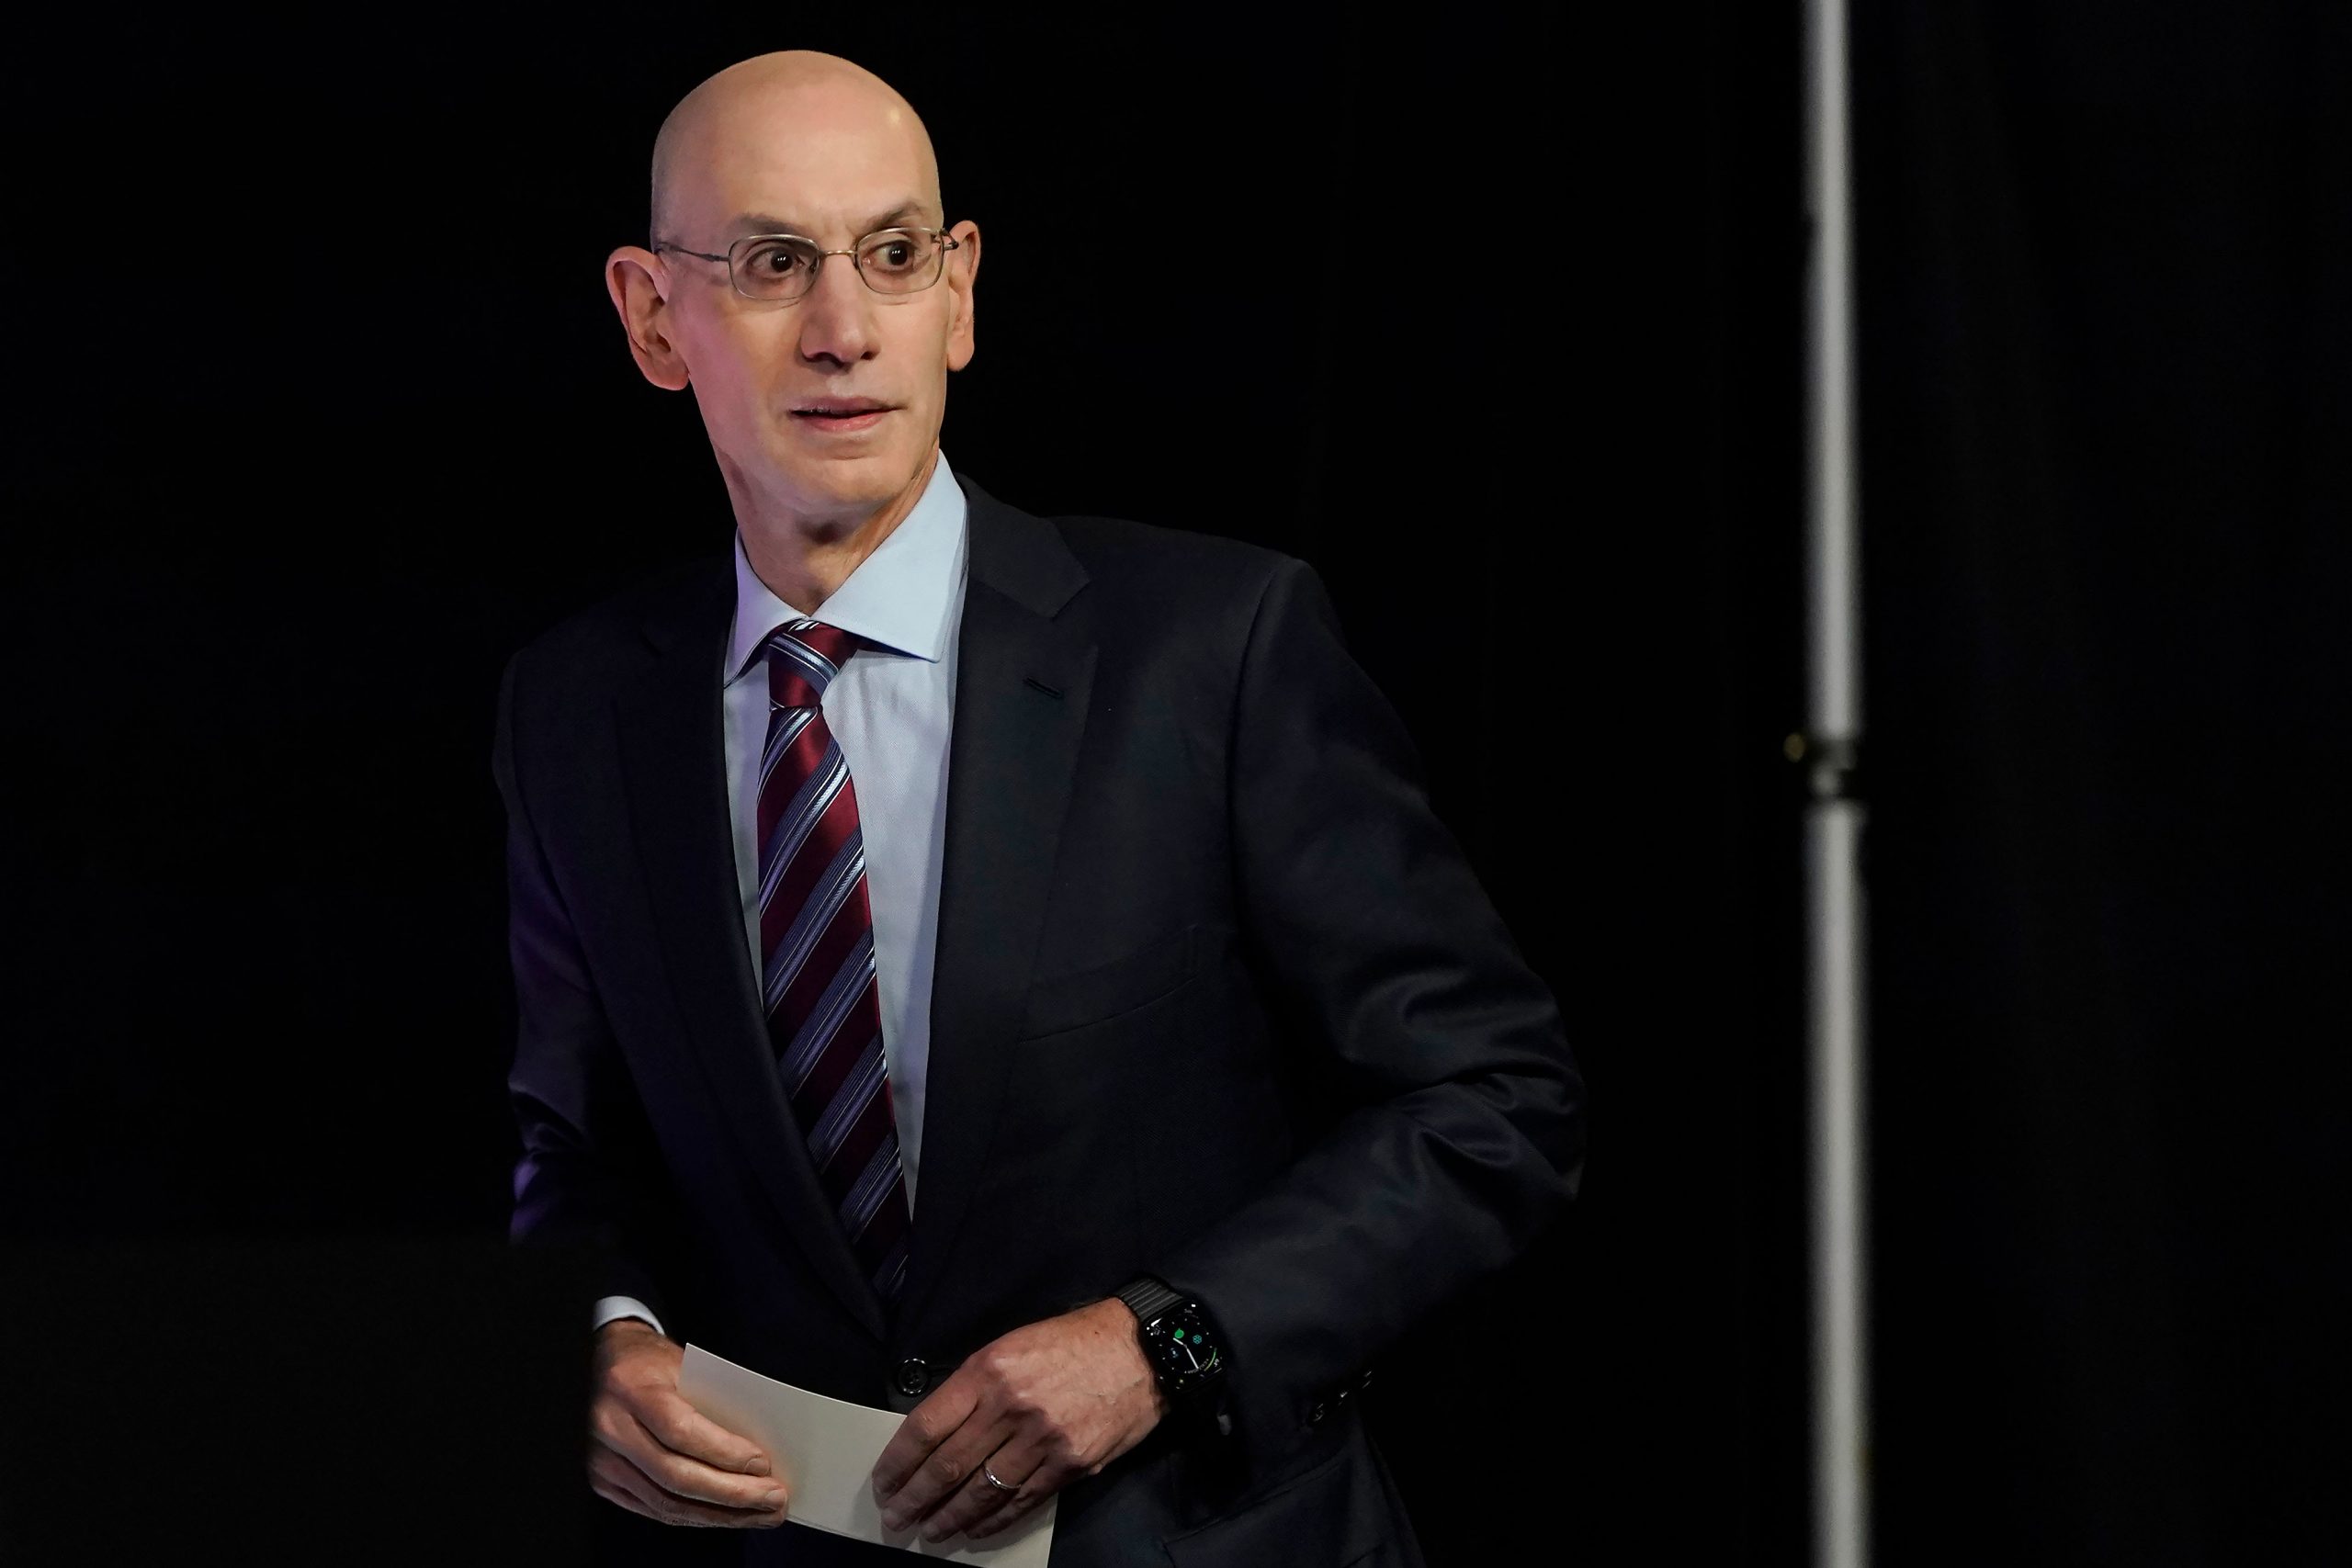 Who is Adam Silver?